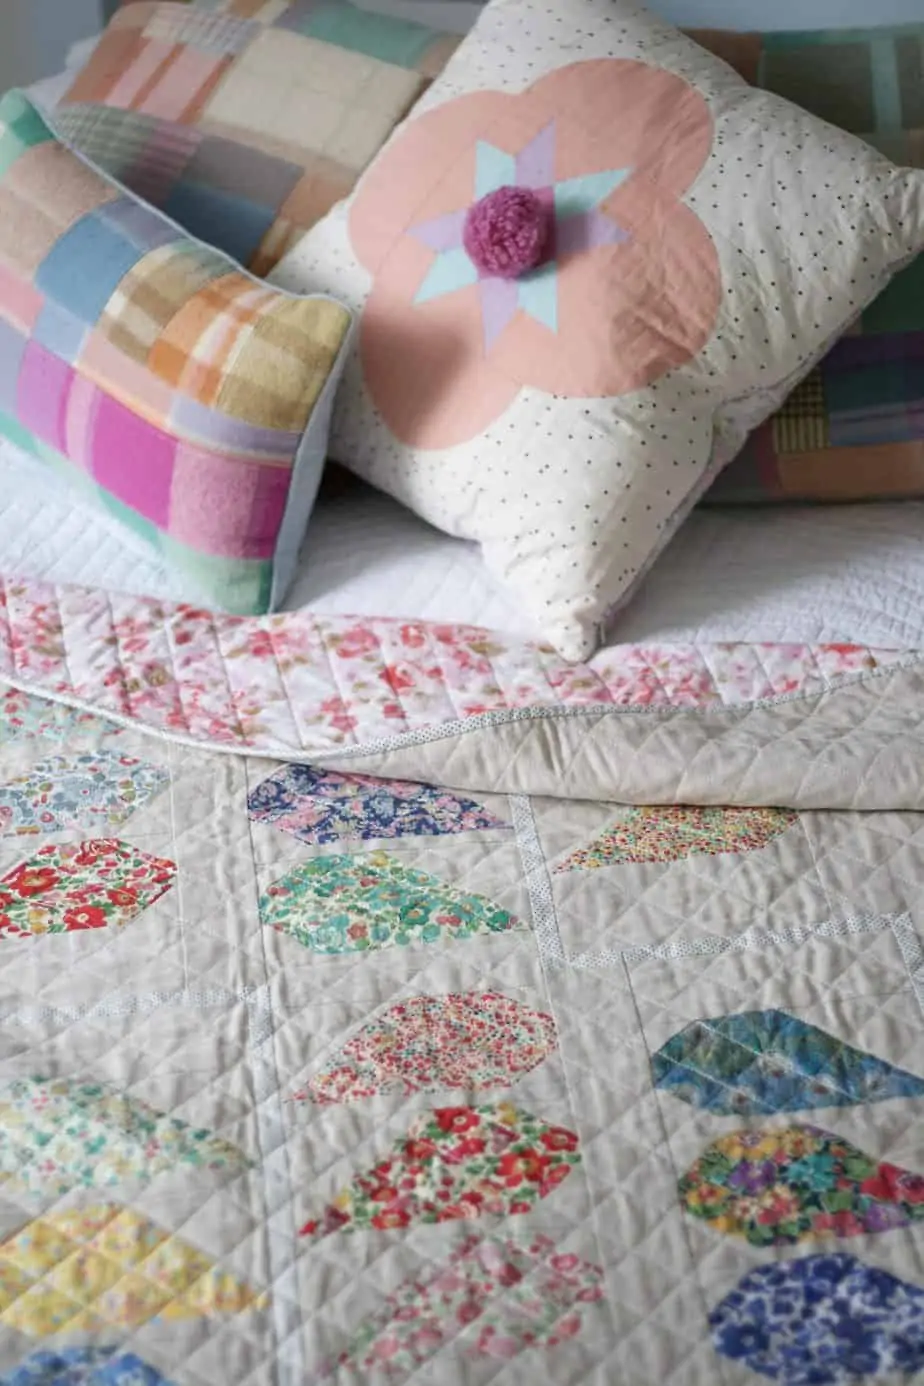 Close up of quilt featuring Liberty prints on blue bed with scatter cushions in background.